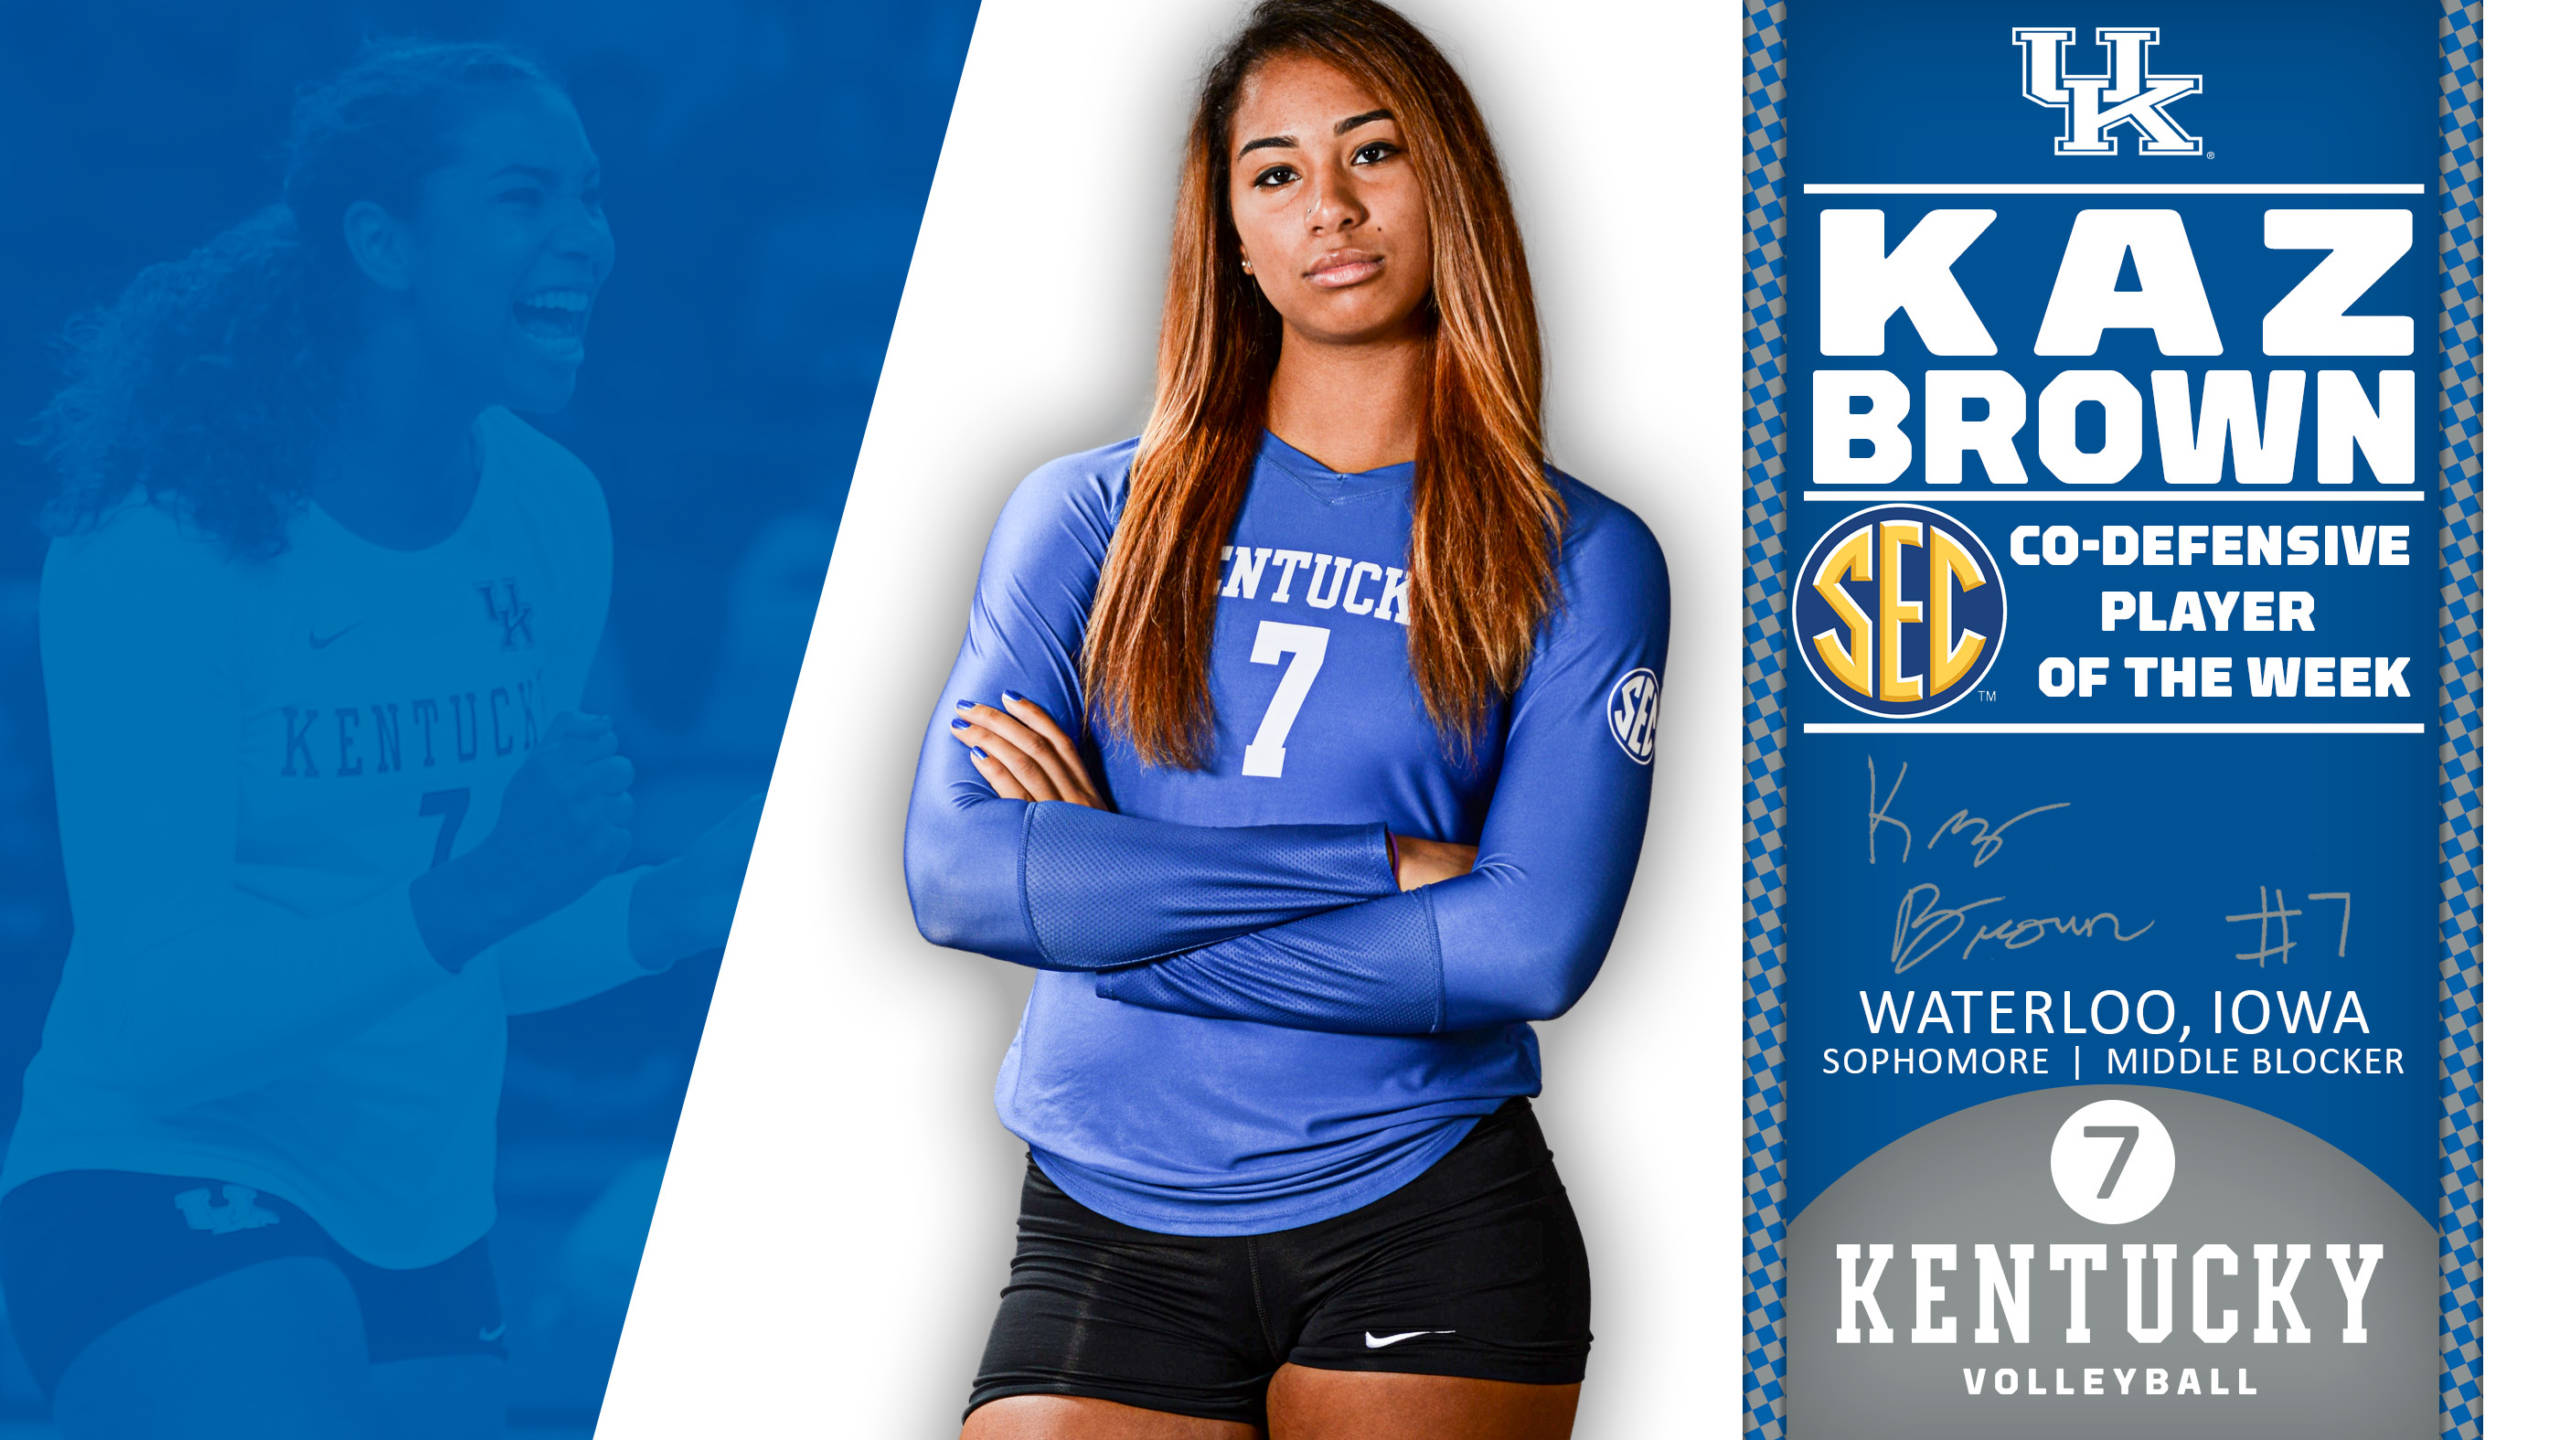 Kaz Brown Named SEC Co-Defensive Player of the Week